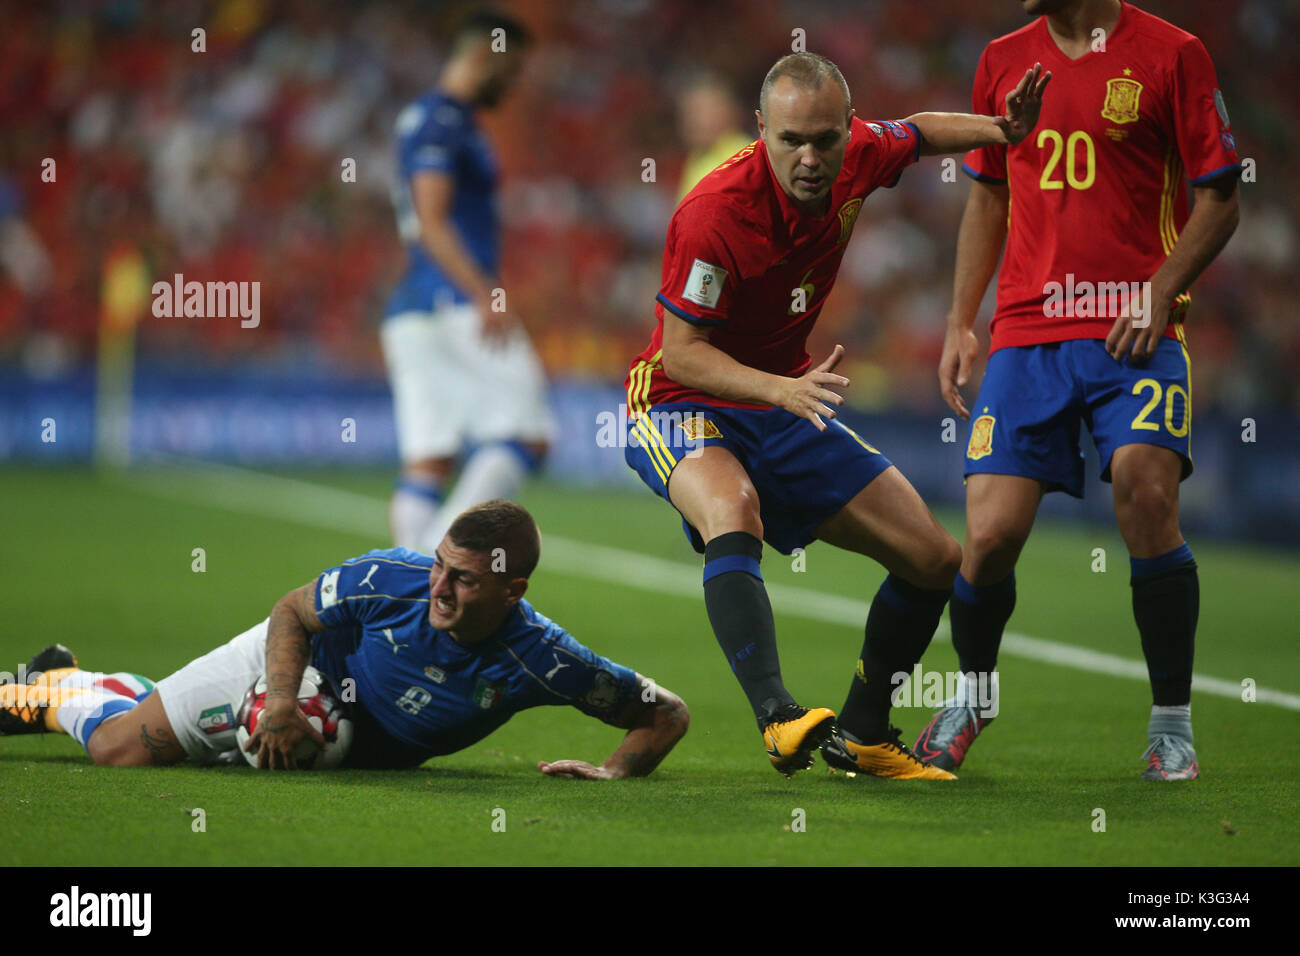 Madrid, Spain. 2nd September, 2017. World Cup qualifiers Russia 2018. Group G. Match between Spain vs Italy. Iniesta and Veratti in action during the match. Credit: Independent Photo Agency Srl/Alamy Live News Stock Photo